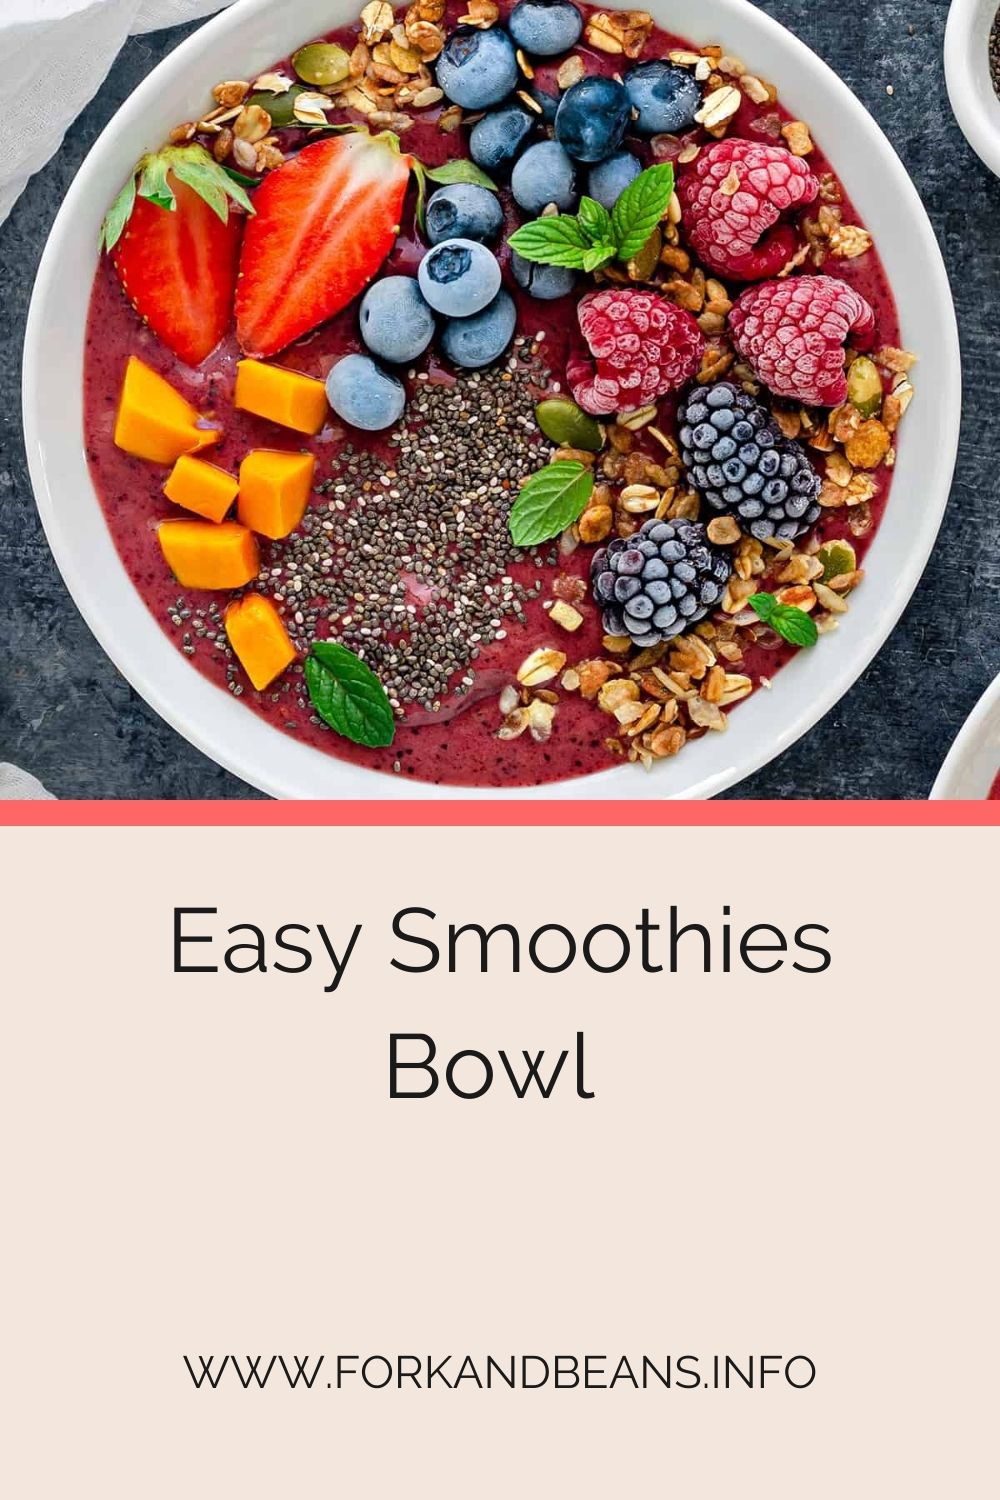 Fruit Smoothie Bowl with Ideas for Toppings